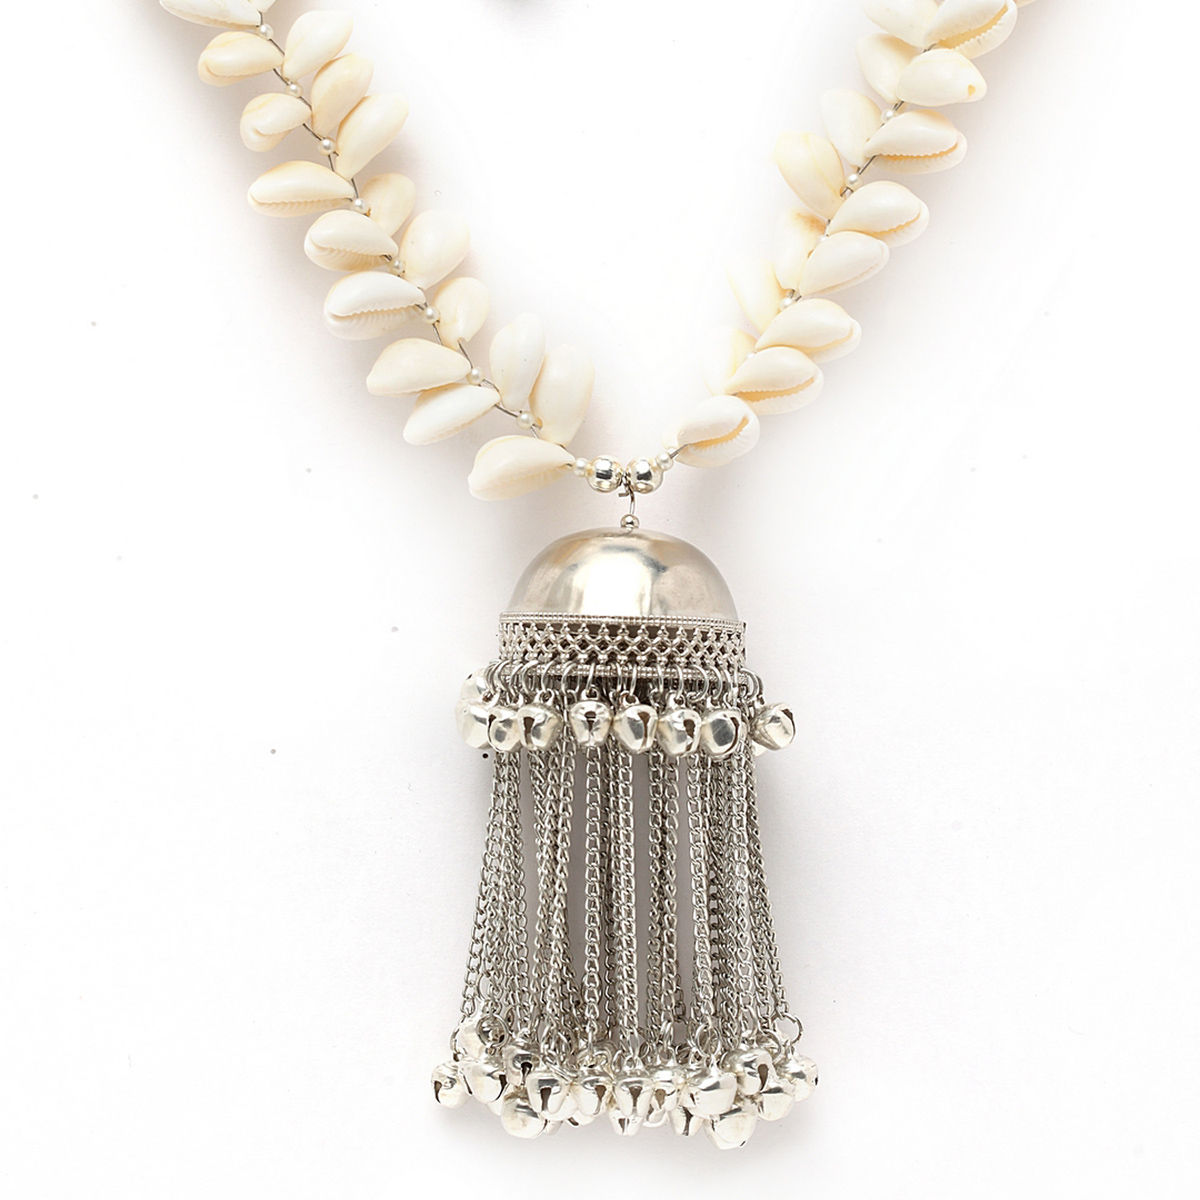 Shell Necklace with Silver Seashell Jewelry